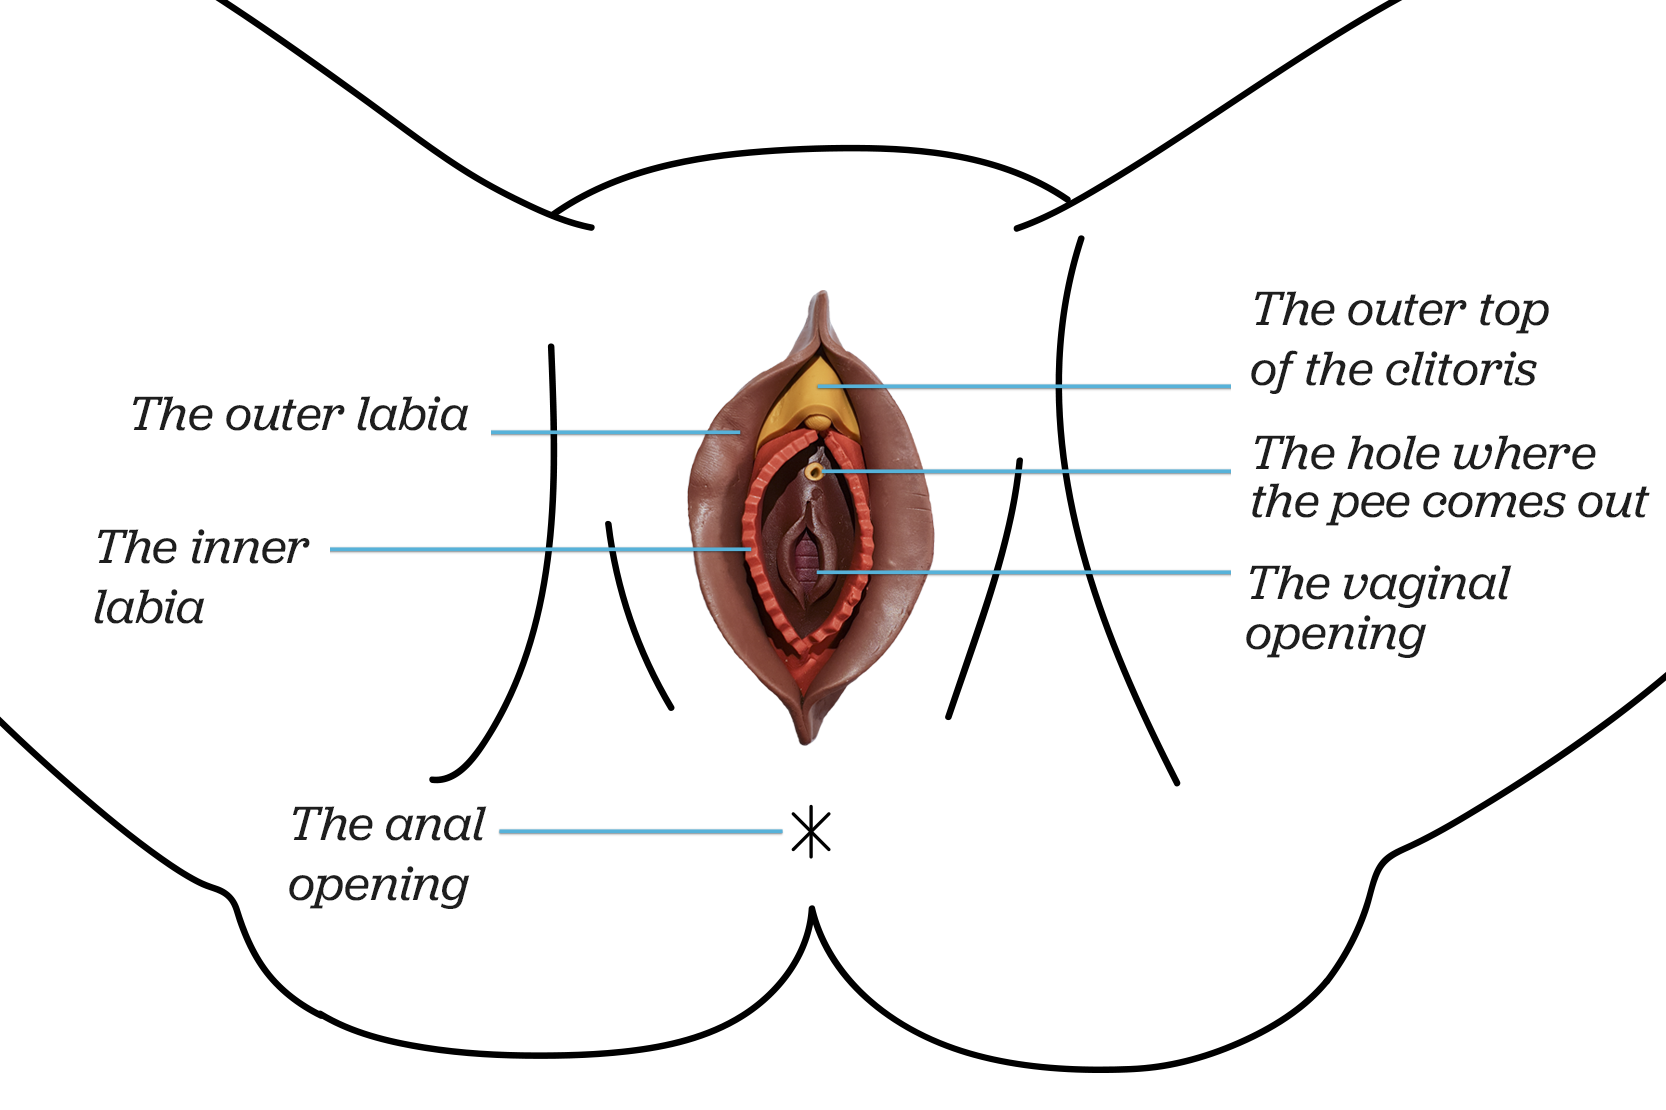 Image of the vulva with names of different parts